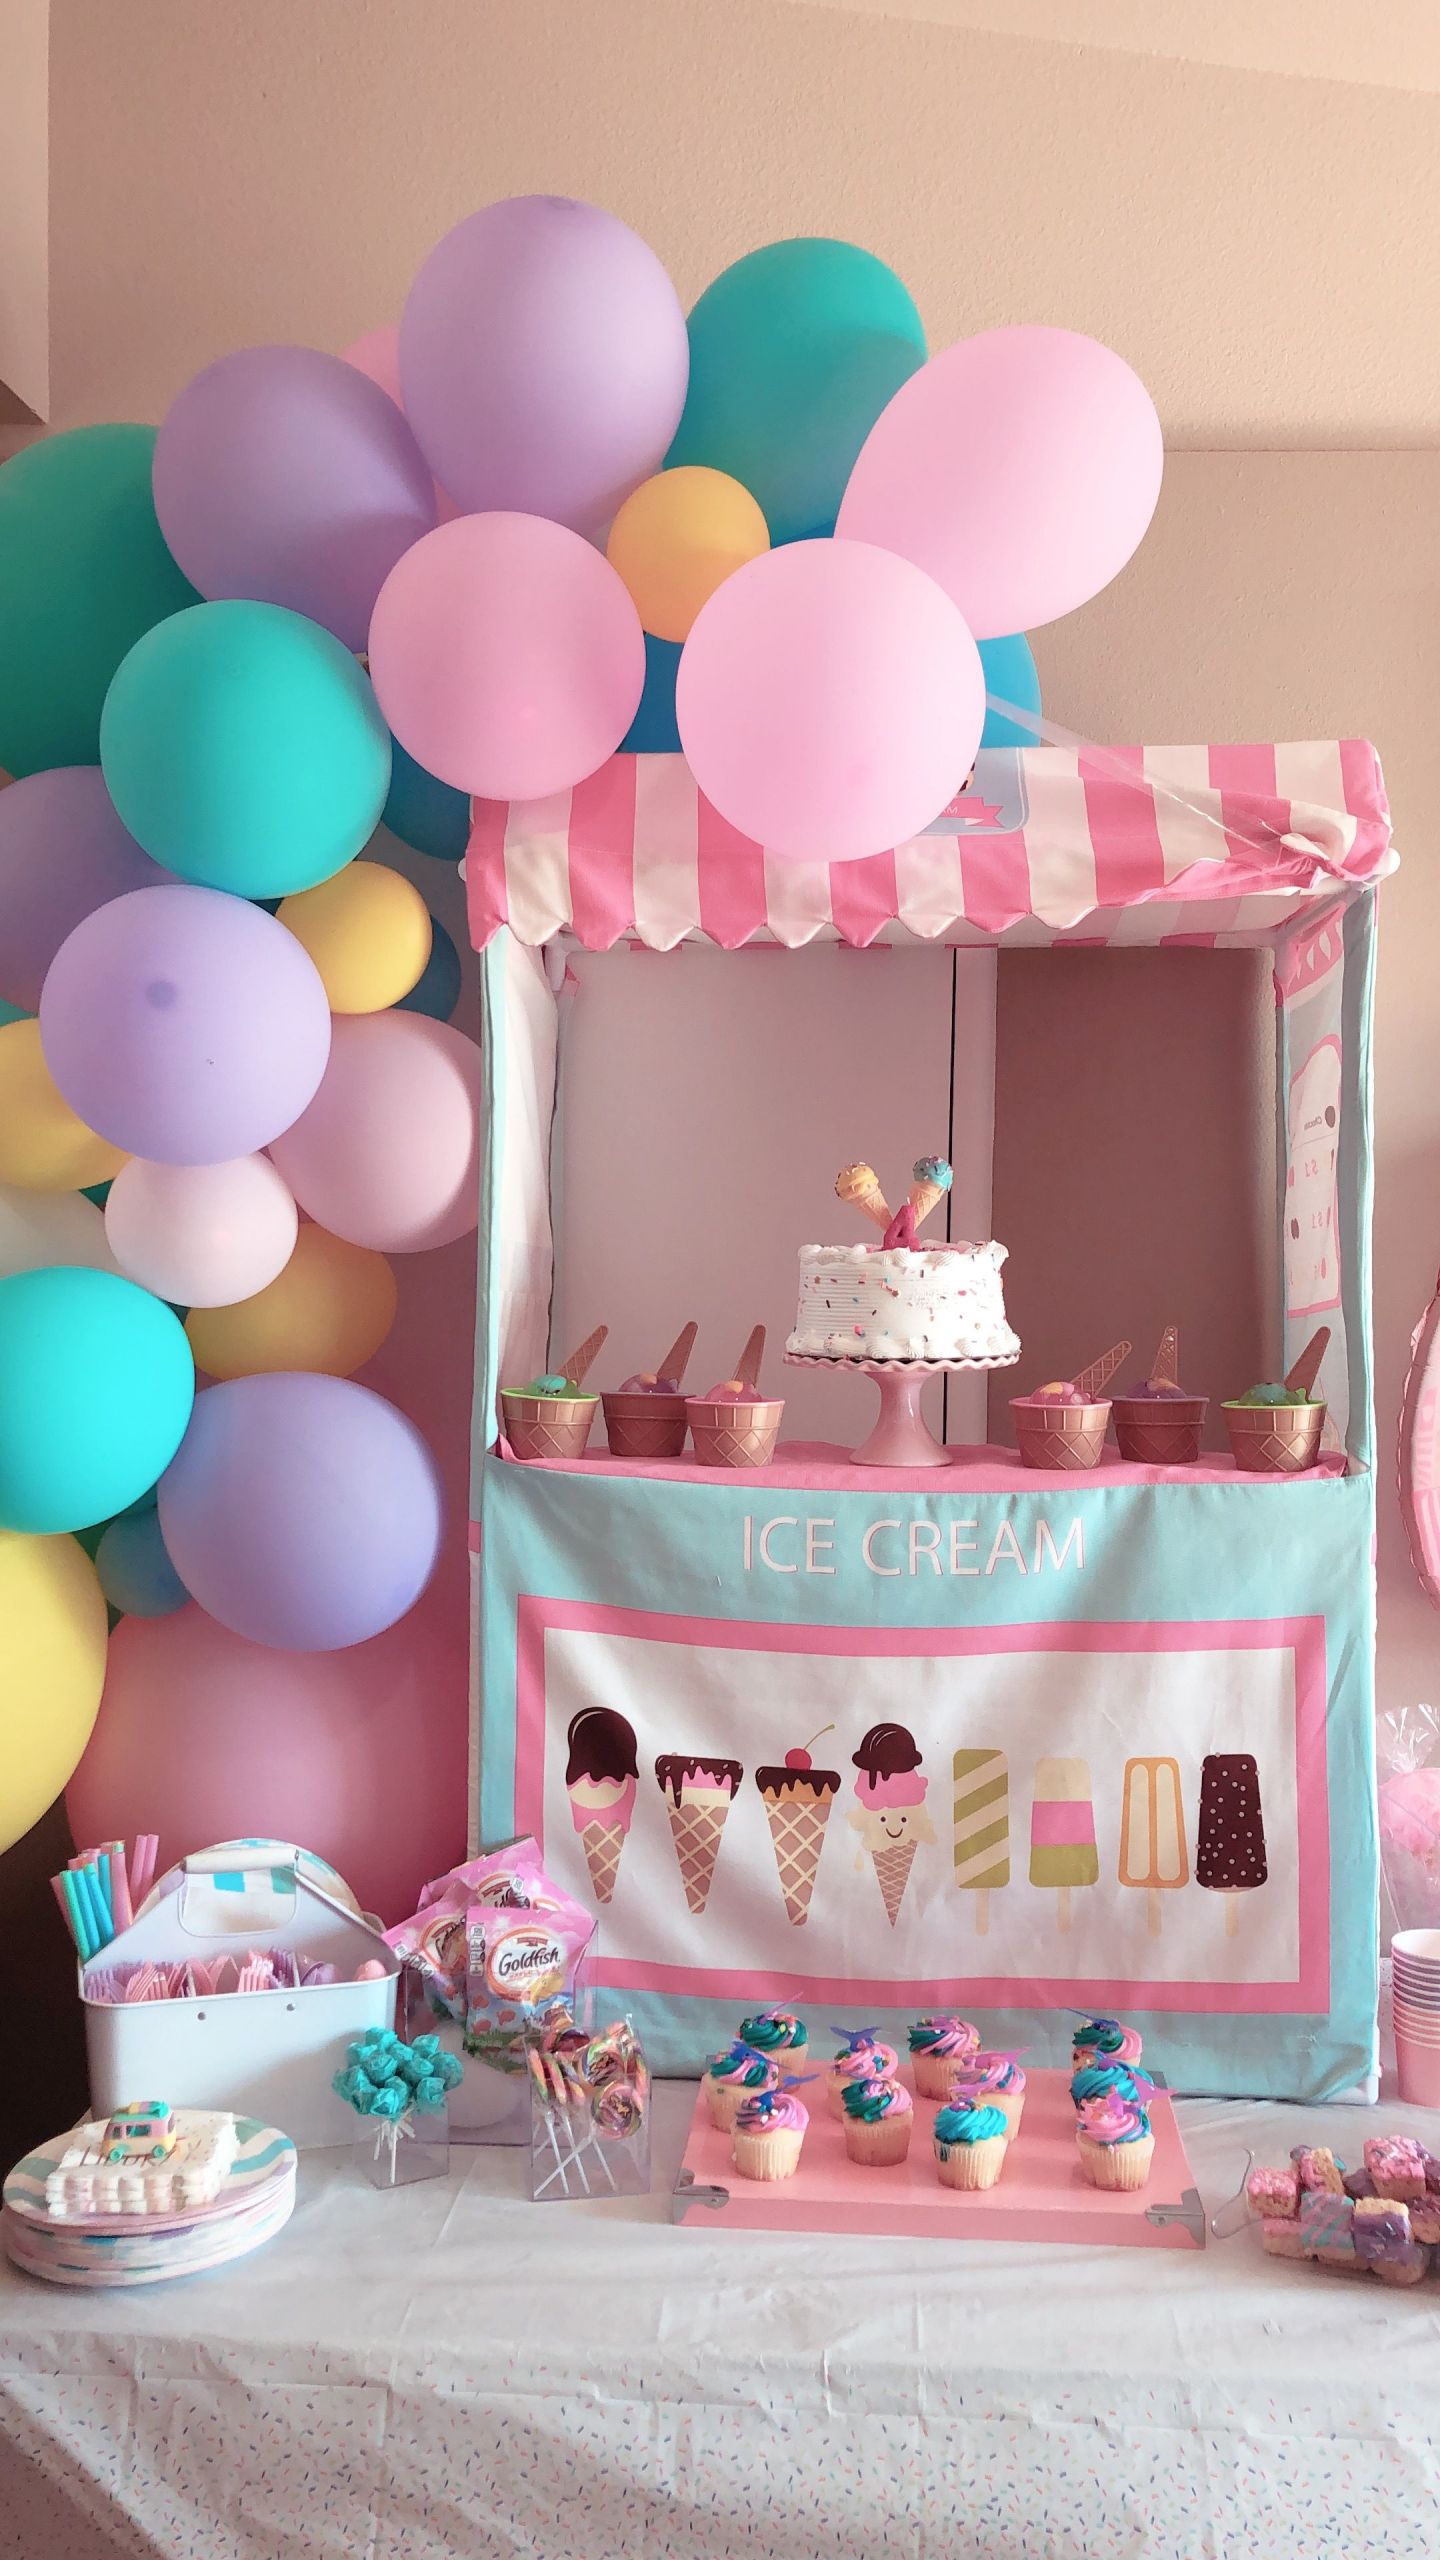 Birthday Party Ideas For 4 Year Girl
 Ice cream birthday party for my 4 year old